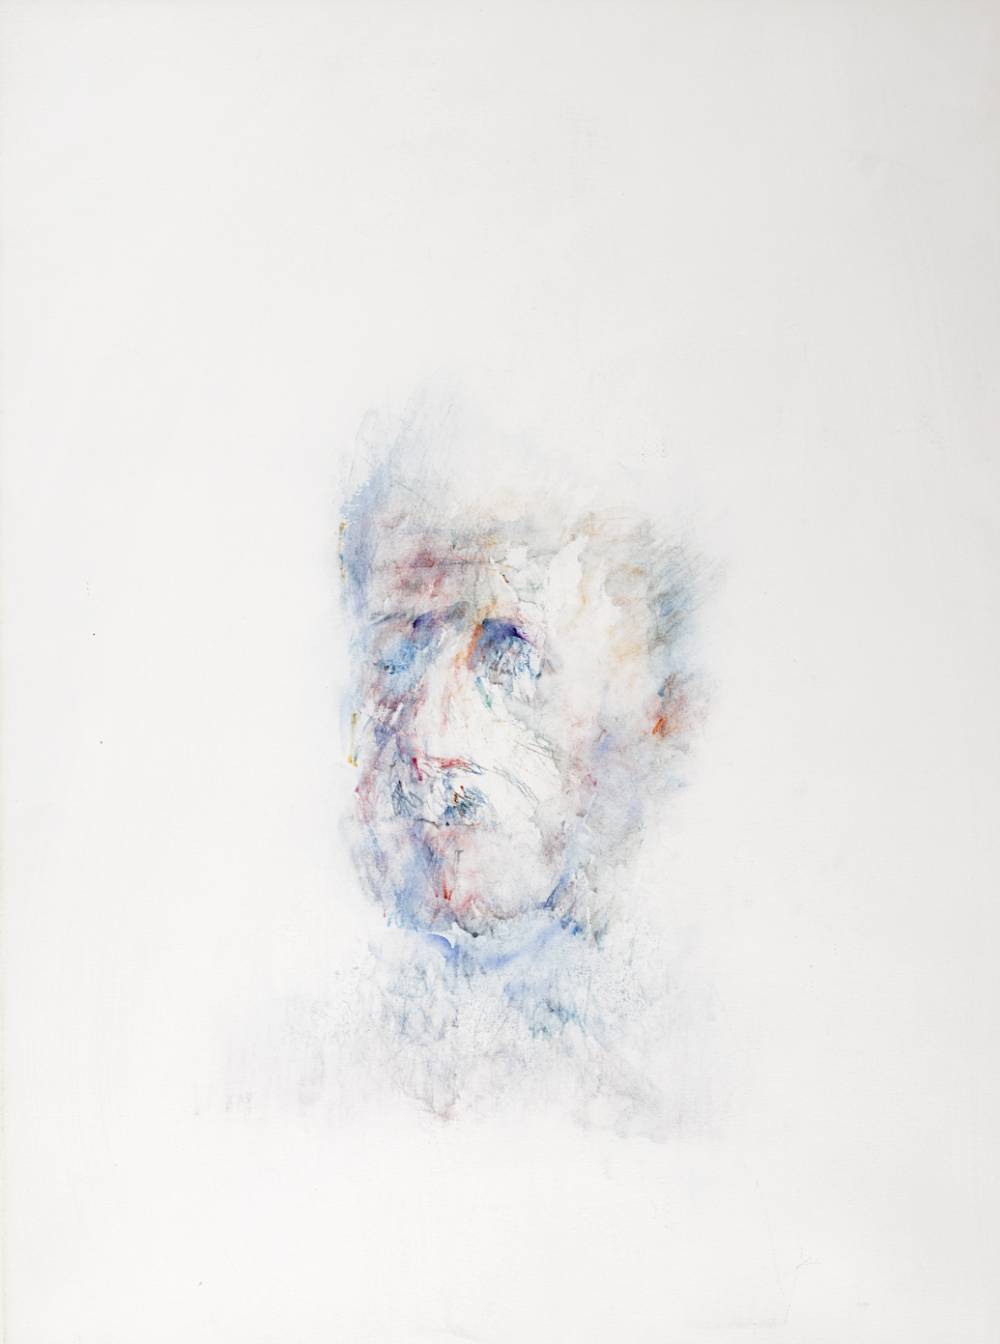 A STUDY TOWARDS AN IMAGE OF JAMES JOYCE, 1982 by Louis le Brocquy sold for 17,000 at Whyte's Auctions